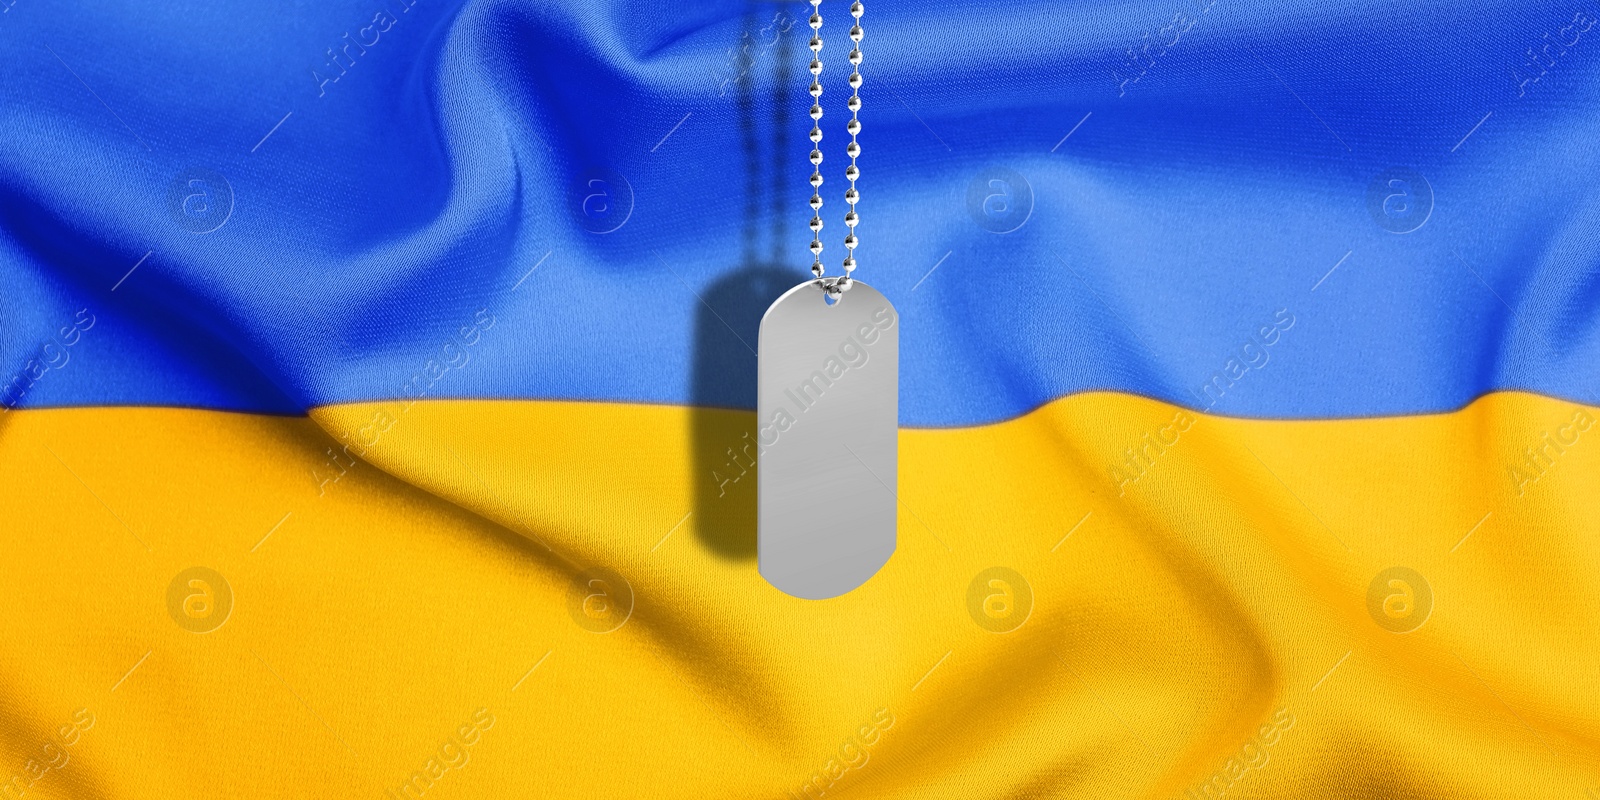 Image of Military ID tag and Ukrainian flag on background. Banner design